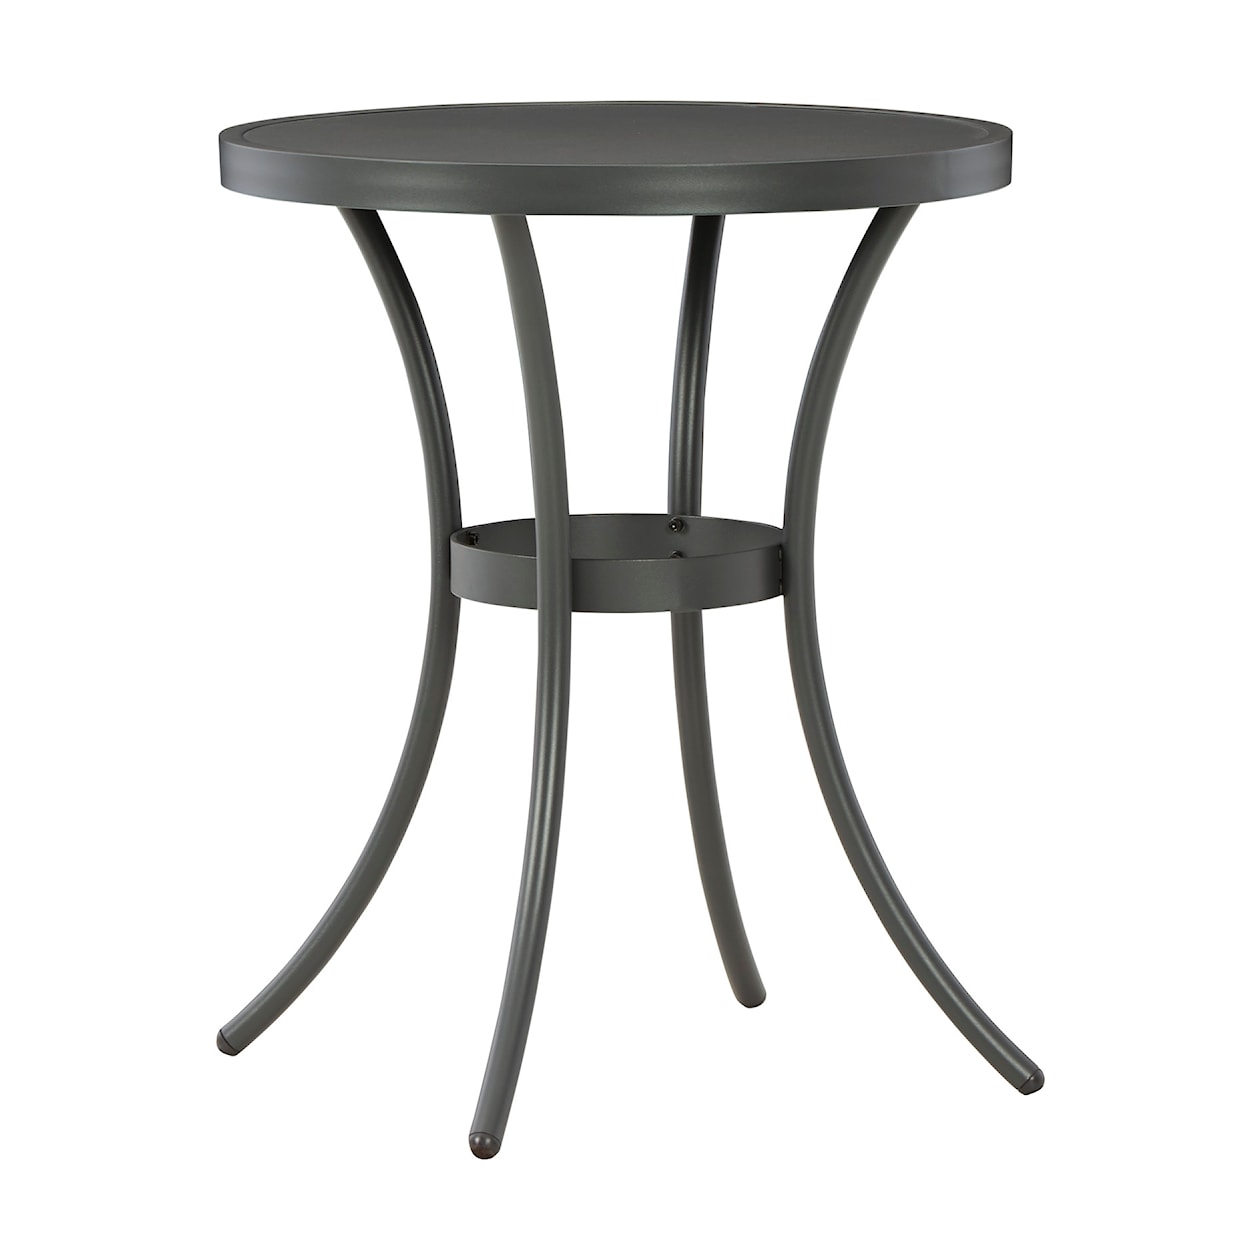 Signature Design by Ashley Crystal Breeze 3-Piece Table and Chair Set